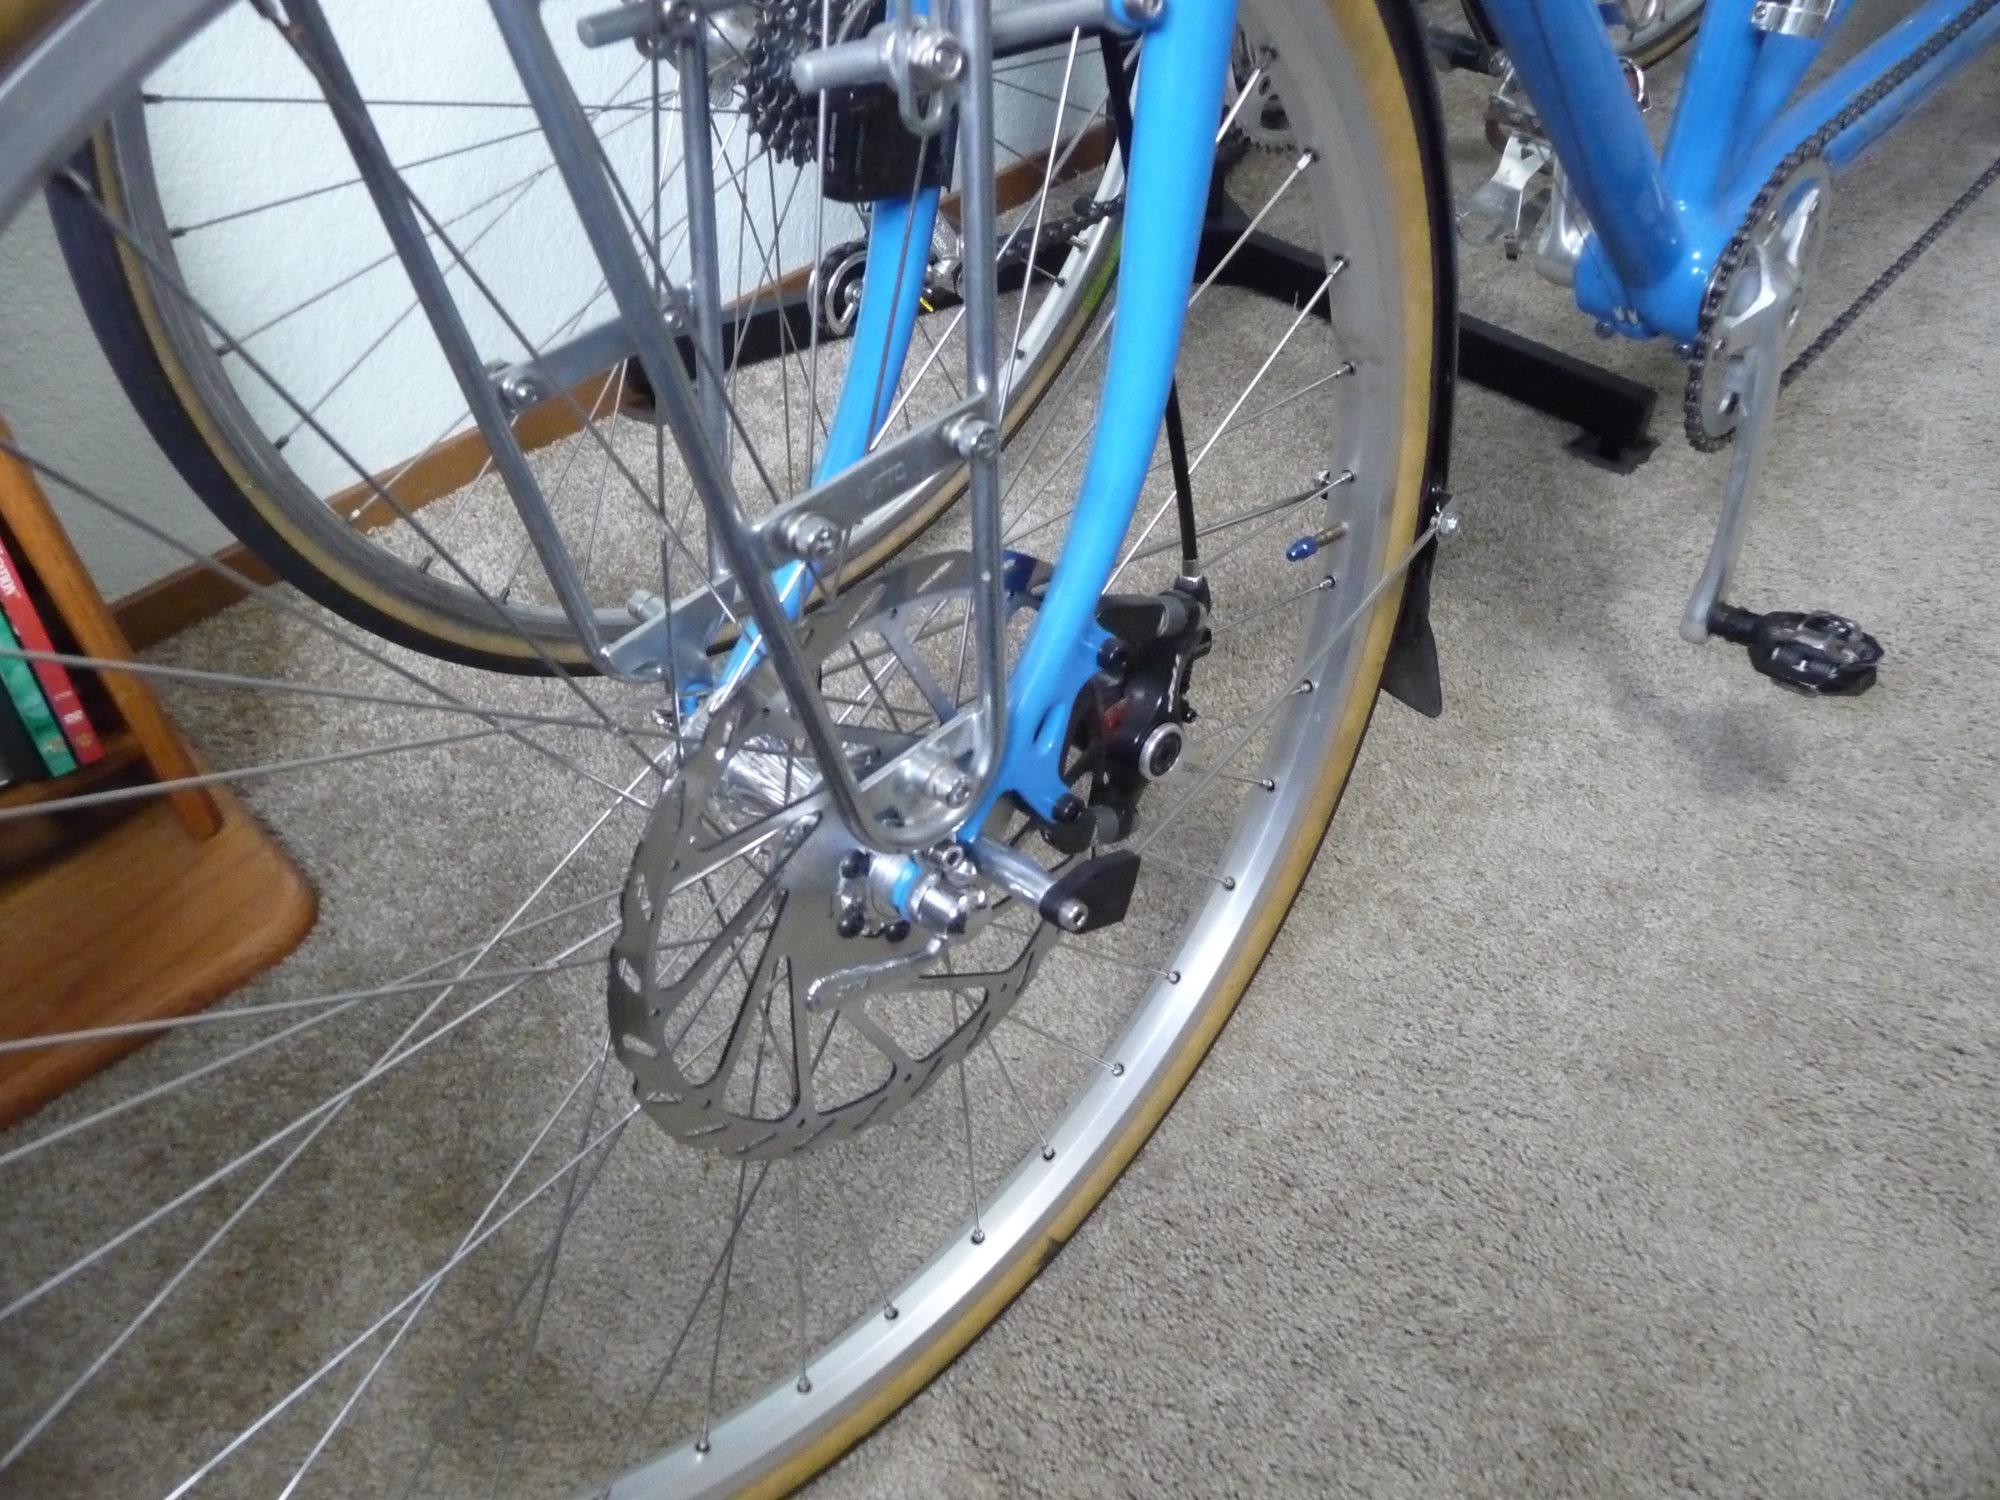 How do you deal with disc brakes and fenders? - Bike Forums